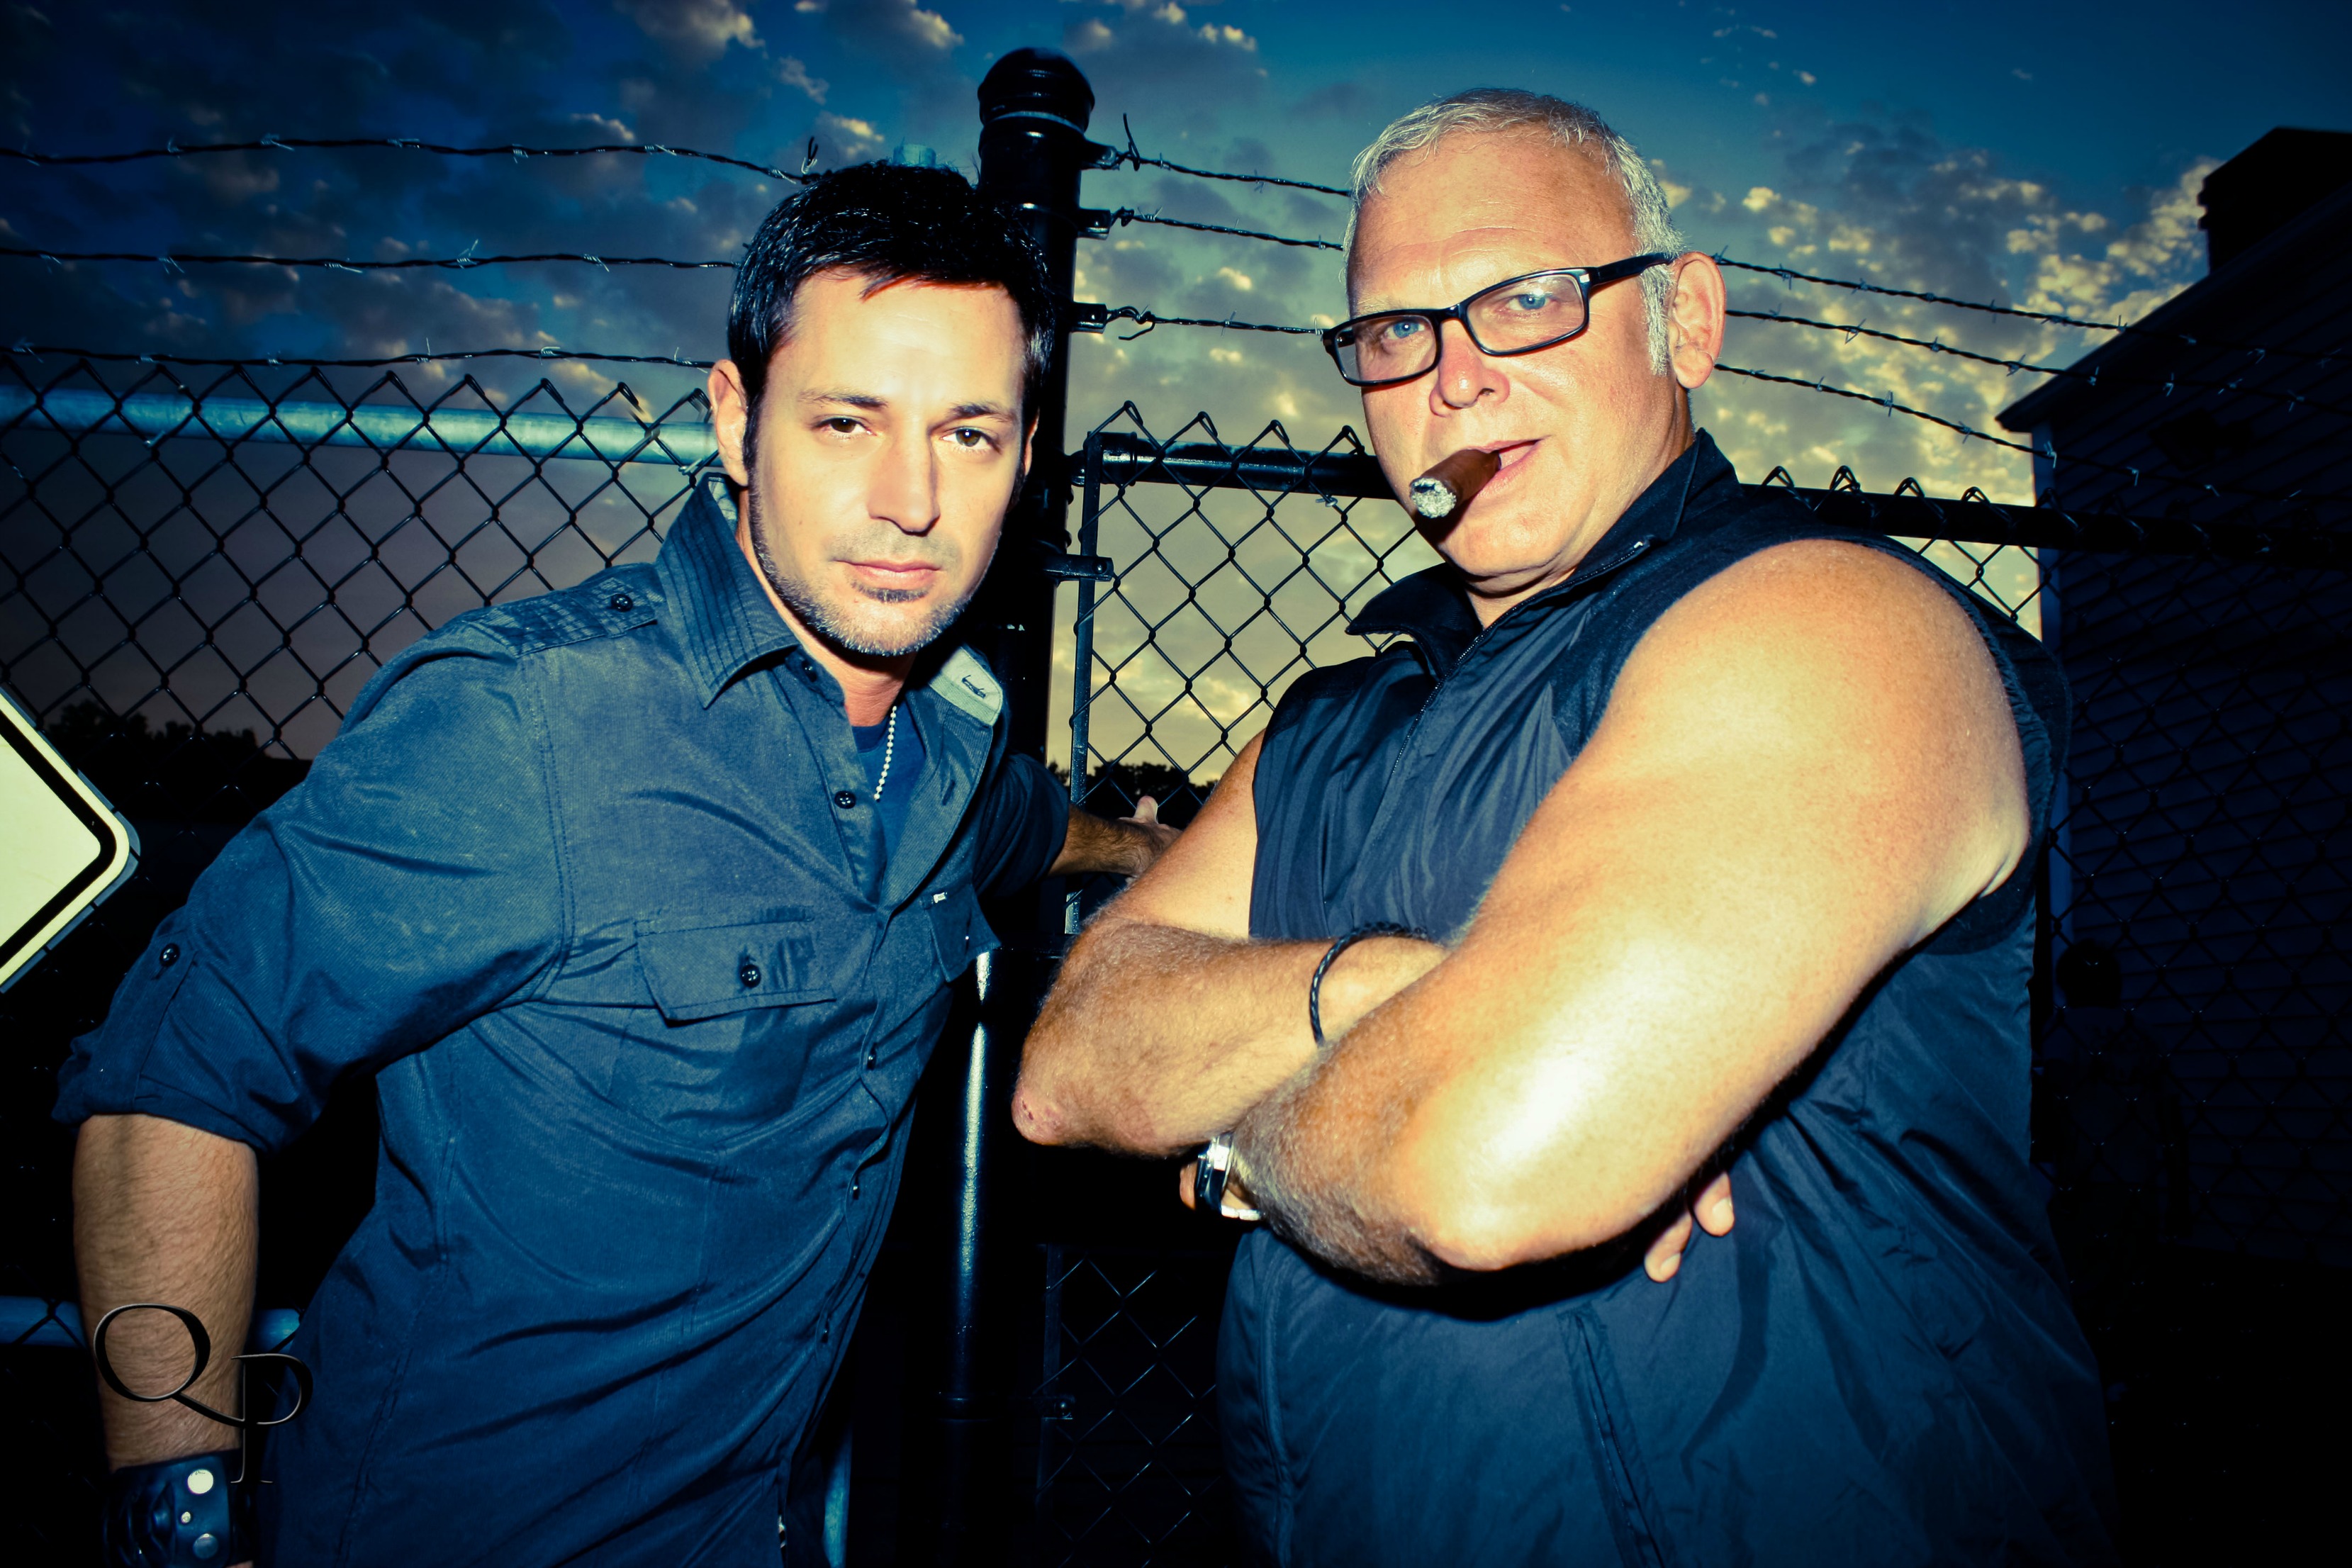 David Gere with actor Billy Vigeant on location - Self Storage (2013)